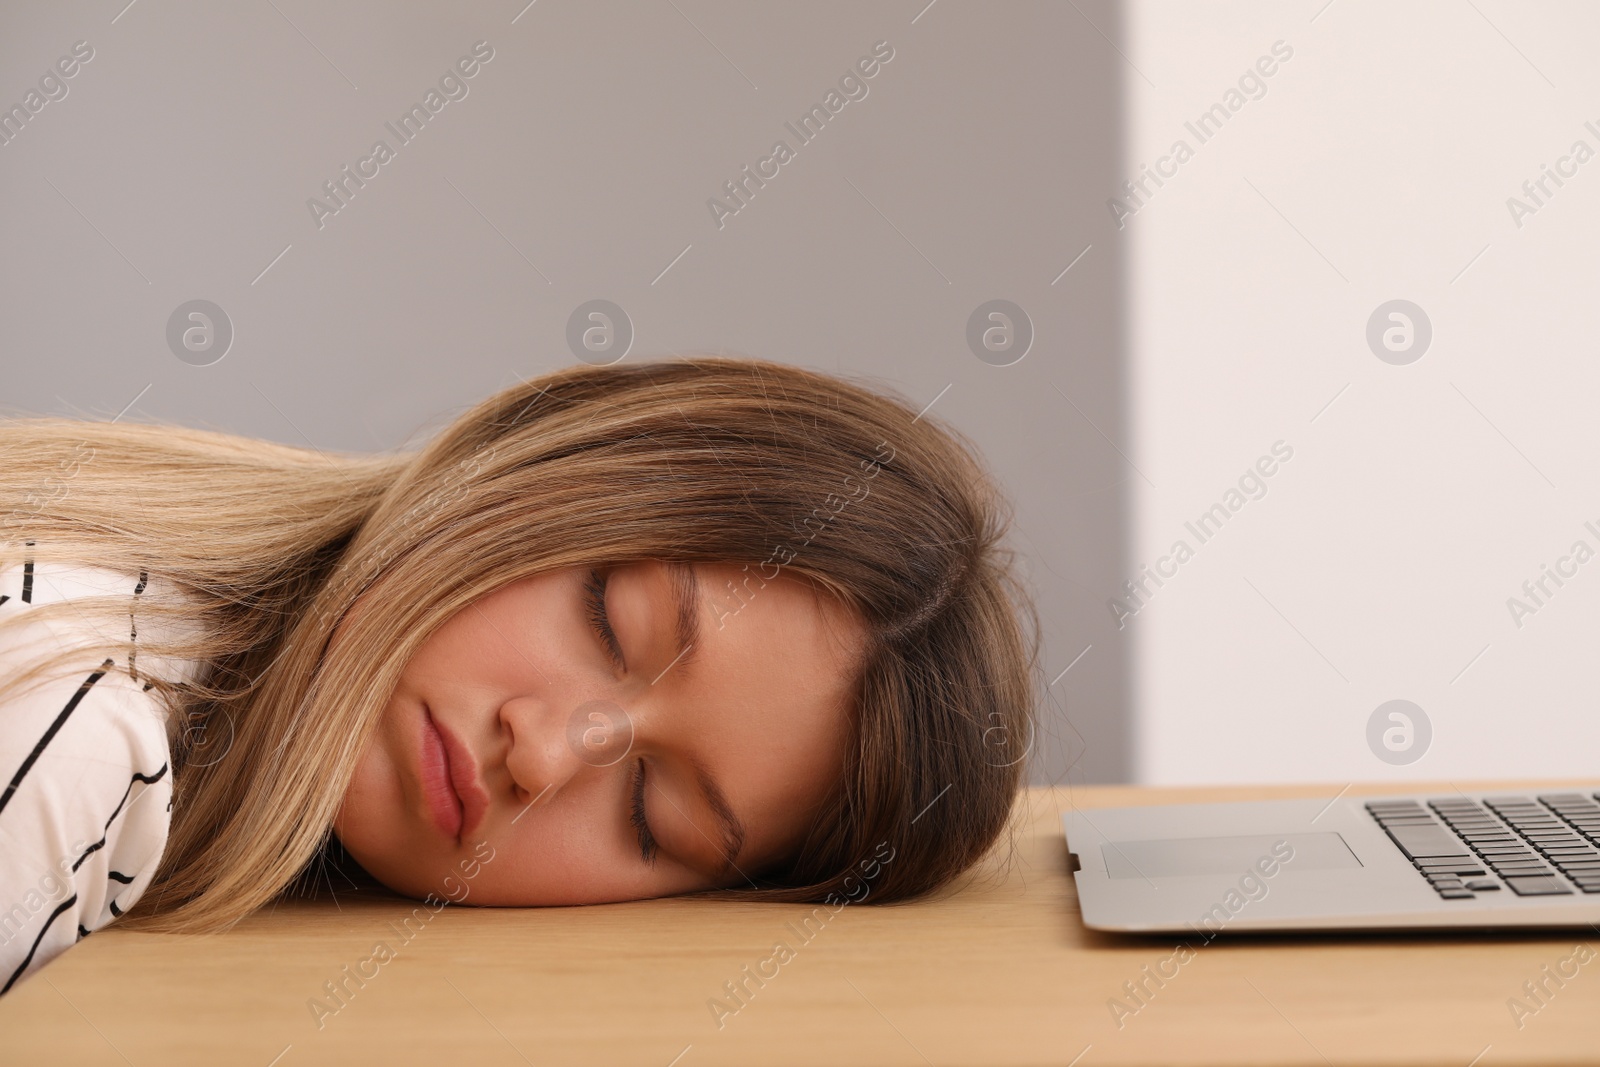 Photo of Young woman sleeping in front of laptop at wooden table indoors